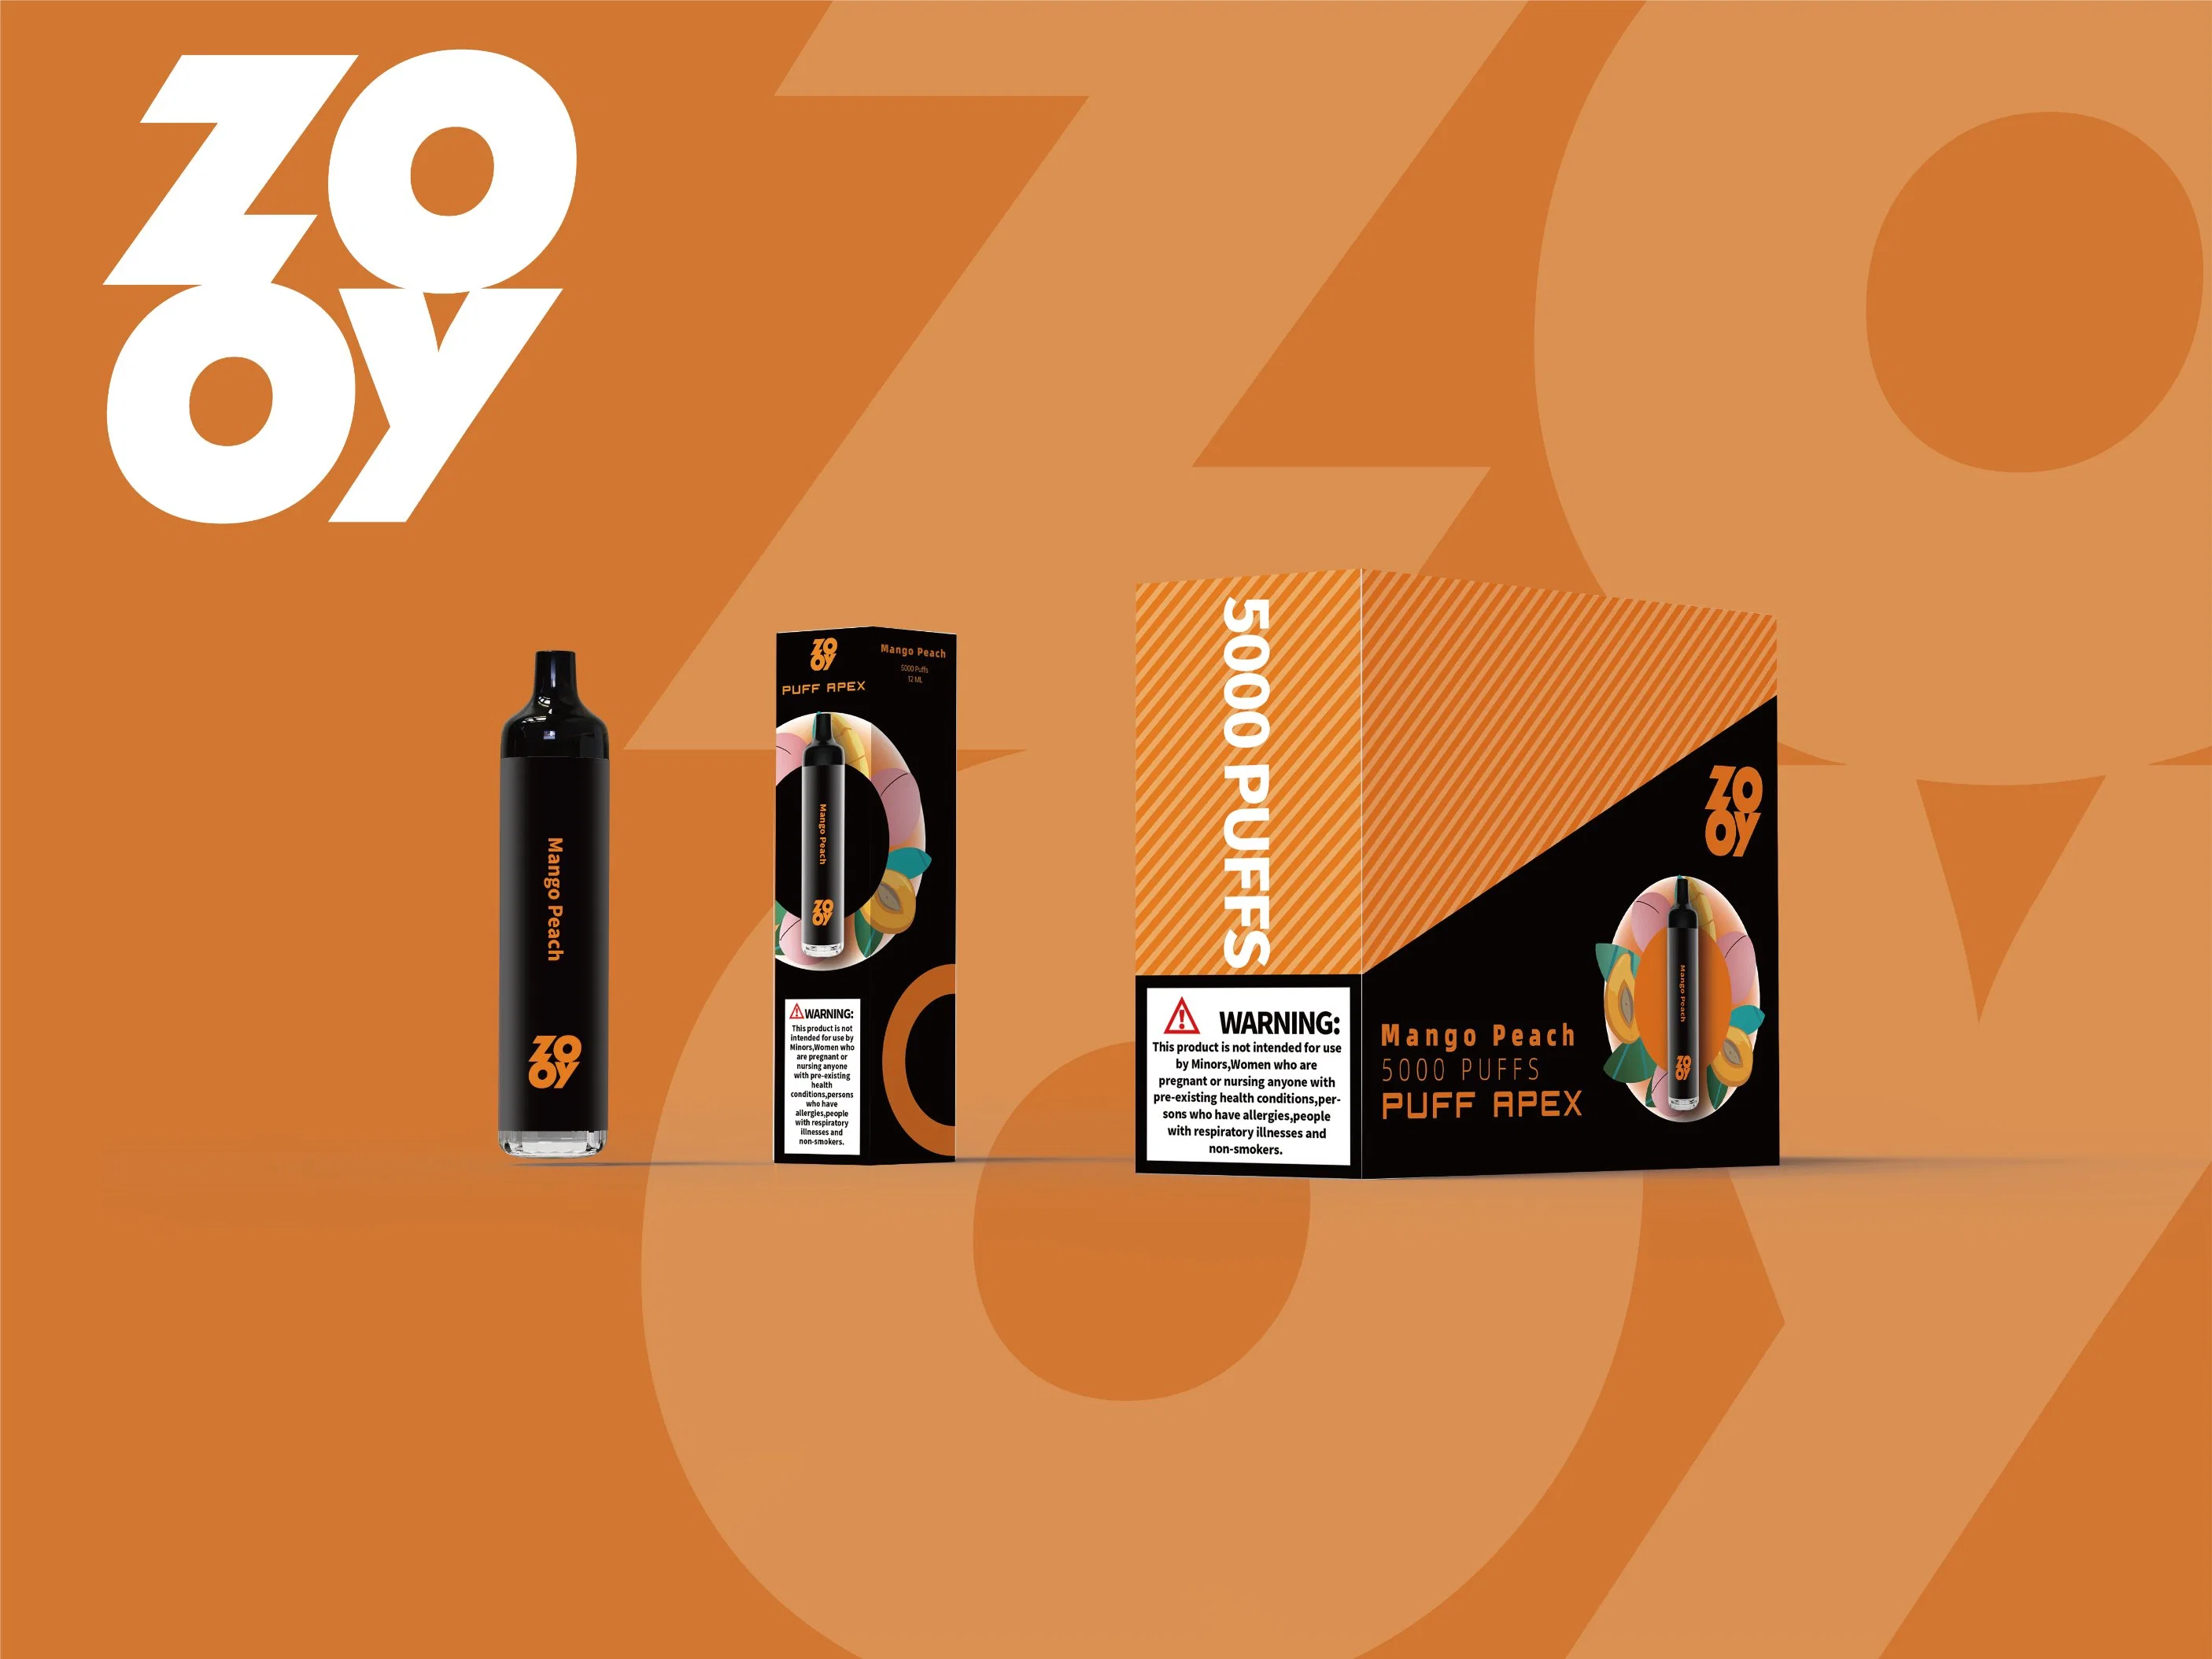 Original Electronic Cigarette Zooy Apex 5000 Puffs E Sigarette Disposable/Chargeables Vapes Disposable/Chargeable Puff 8000 Rechargeable 650mAh Cola Bottle 6000 Mini Cup 50mg